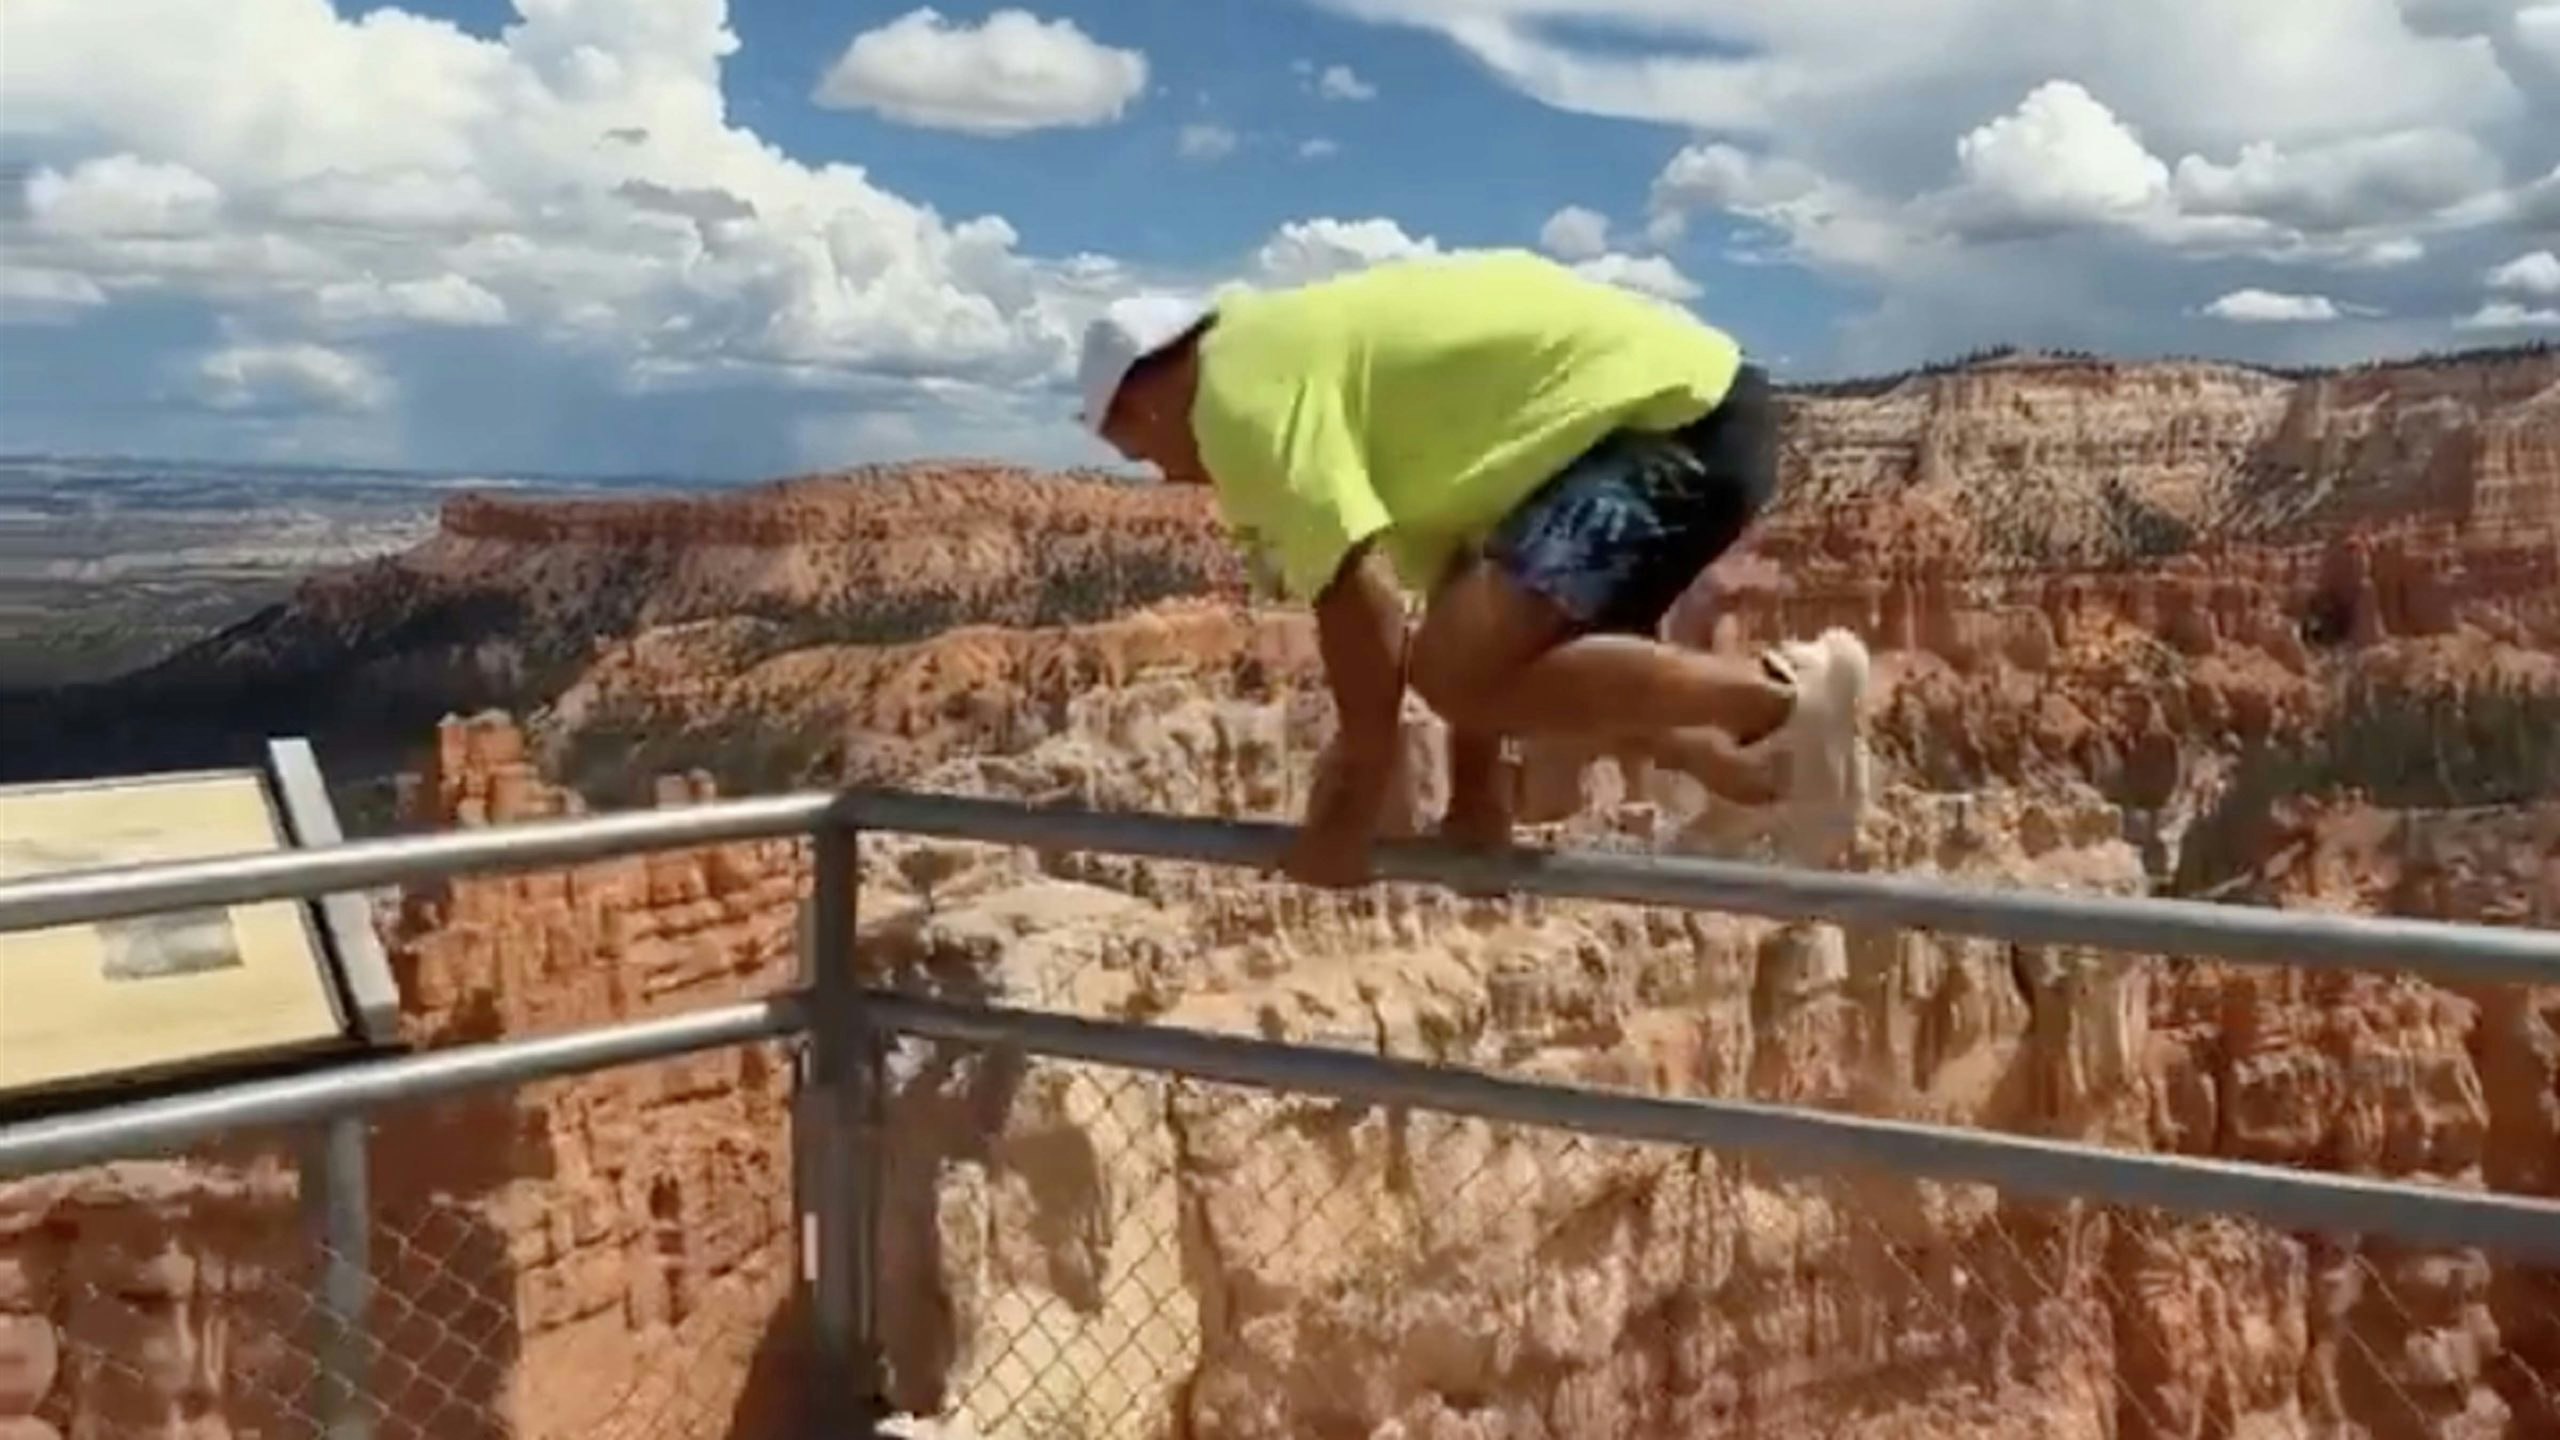 Dude jump bryce canyon 8 13 22 scaled